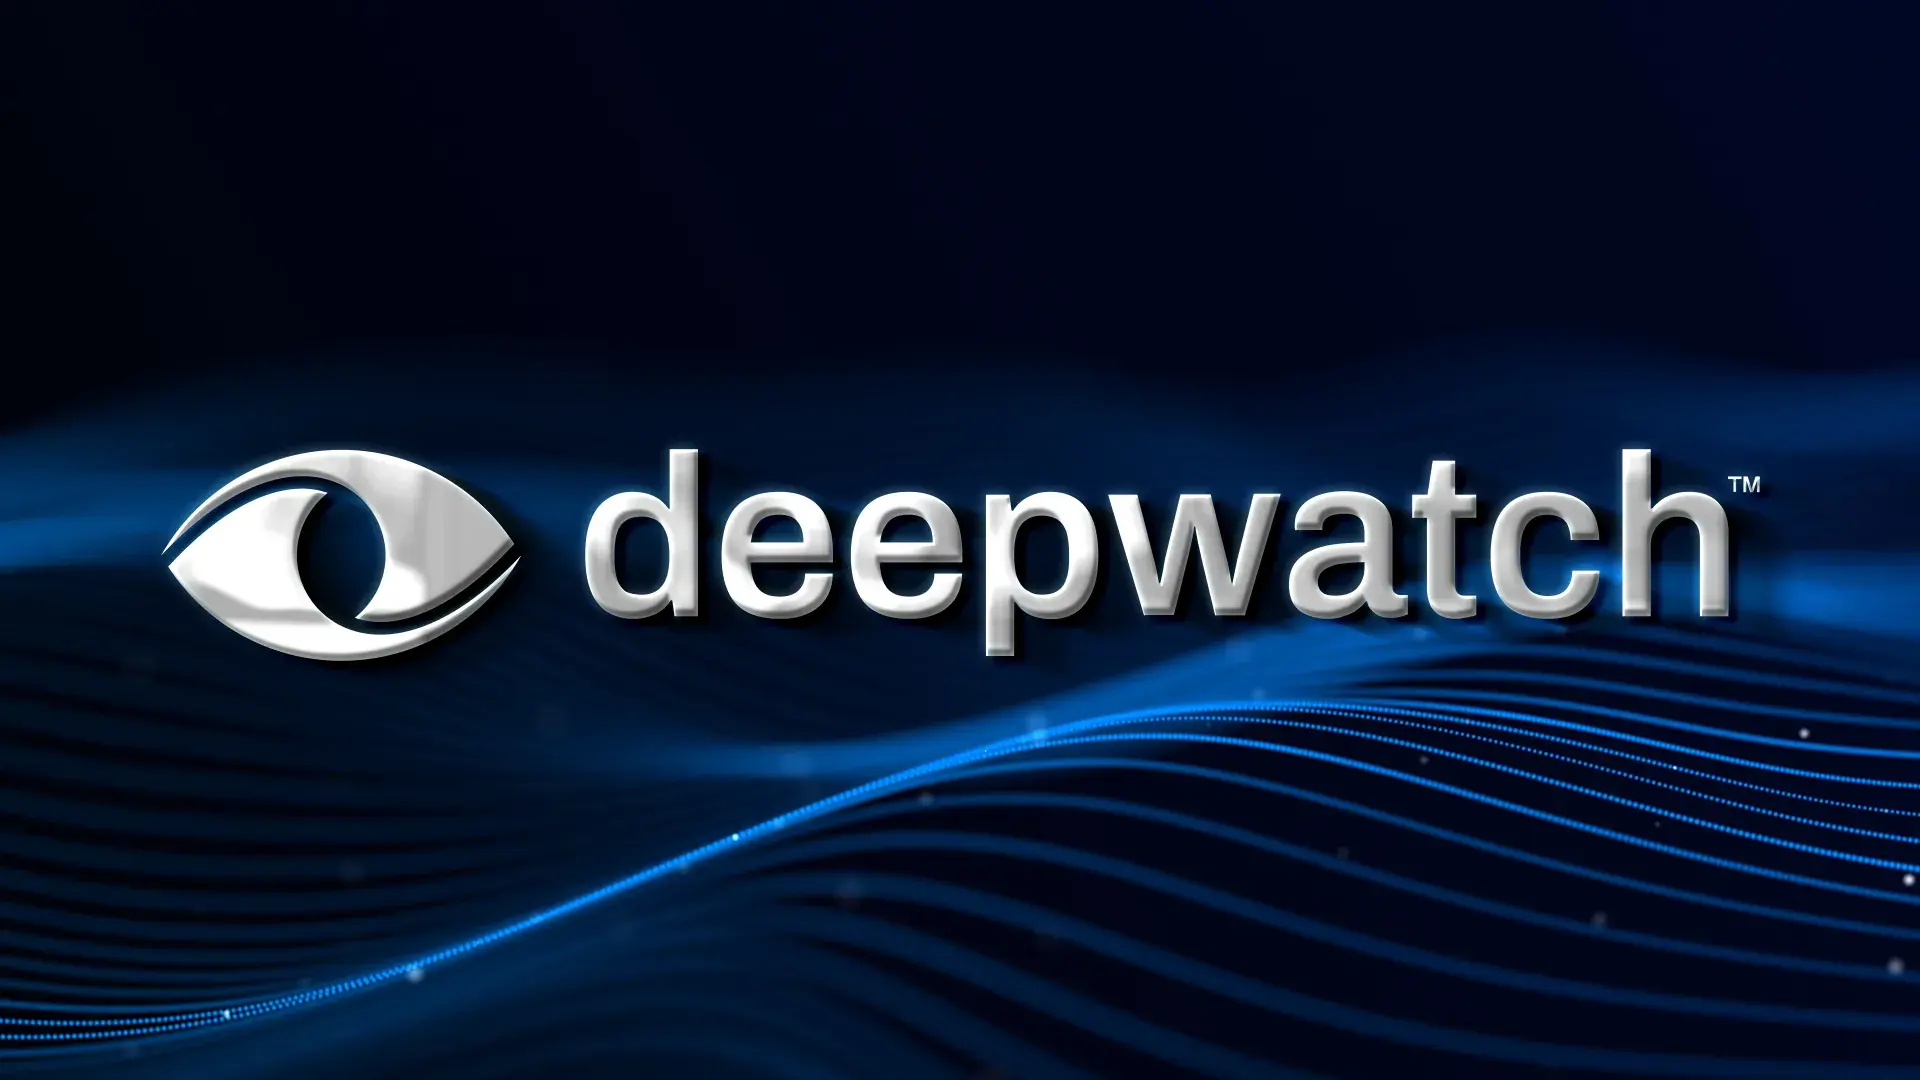 Deepwatch Managed Detection & Response